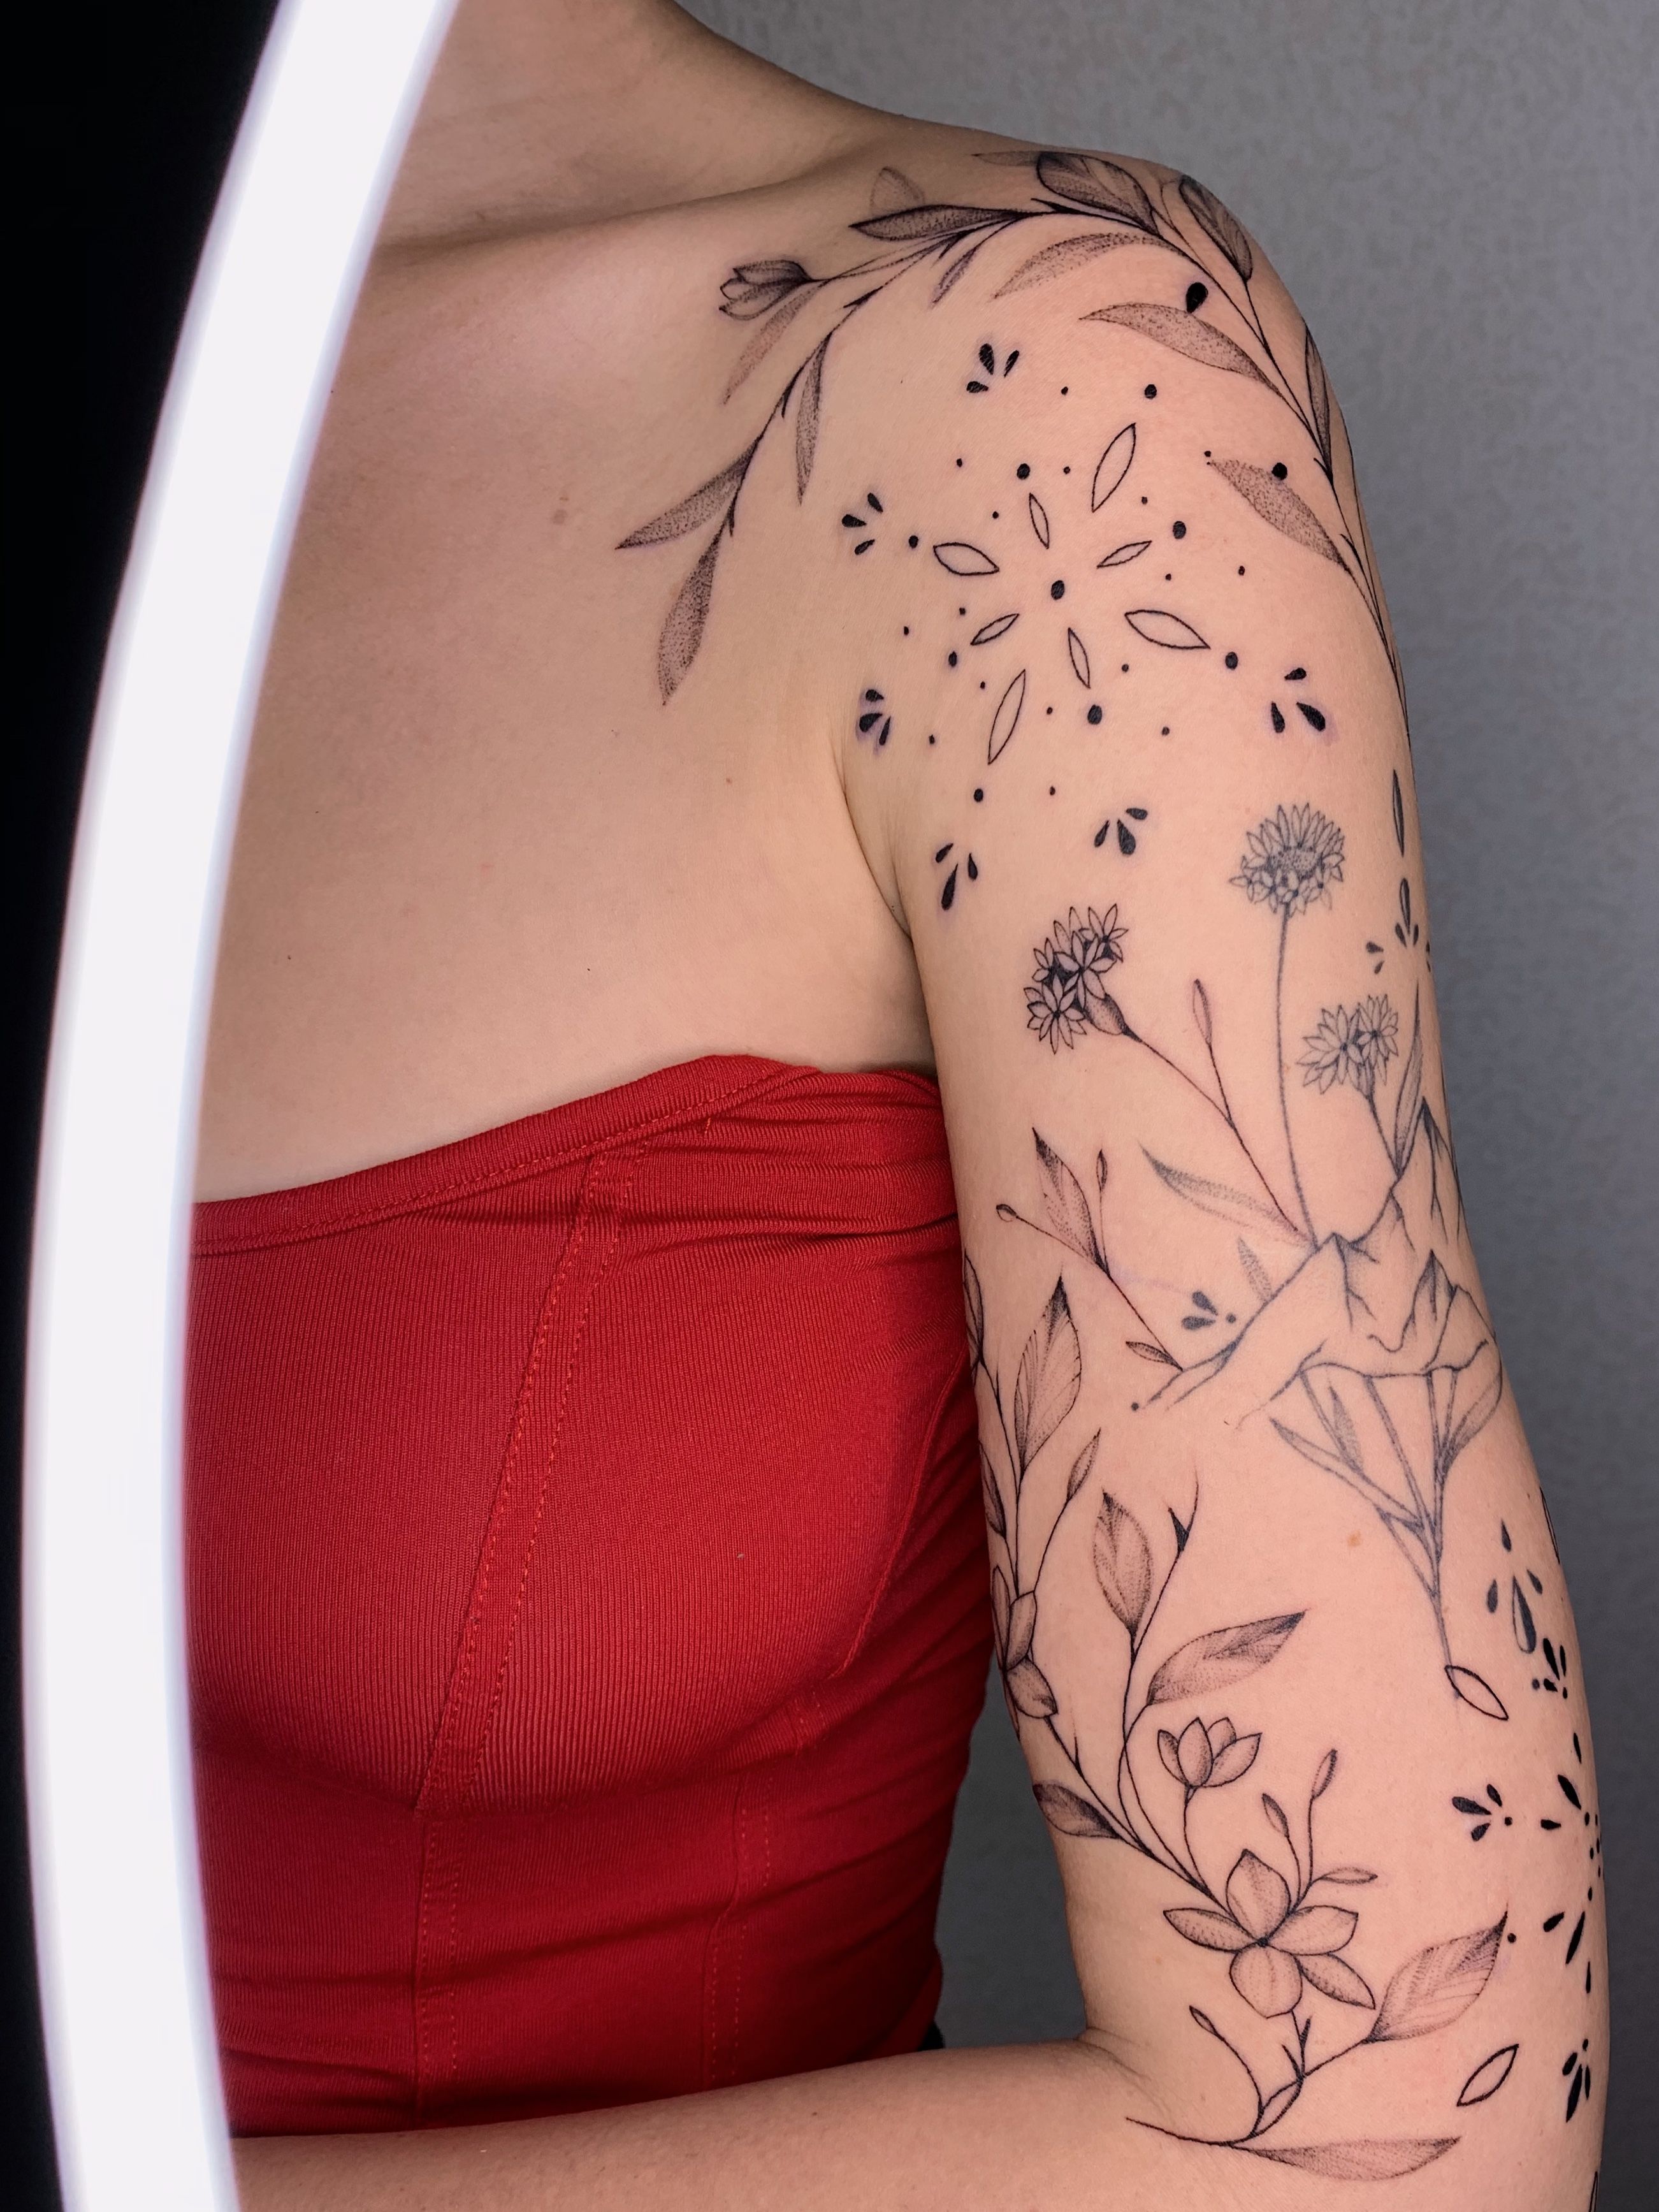 Delicate Botanical Tattoos by Pis Saro | Search by Muzli